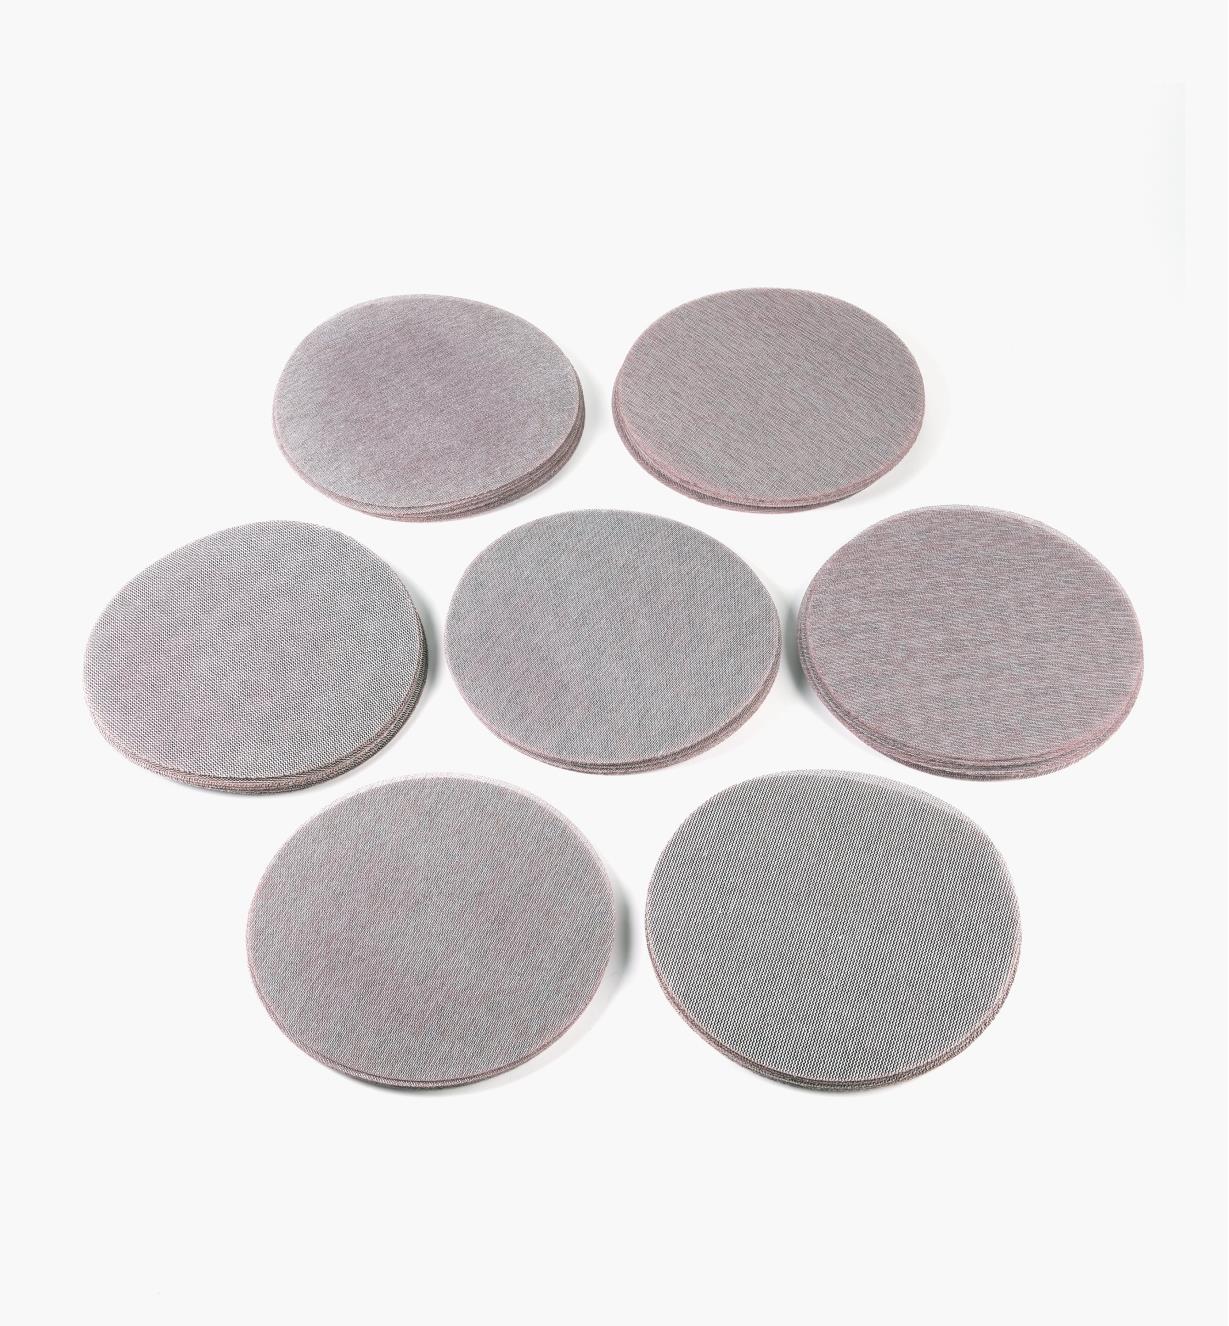 10 each of the 80, 100, 120, 150, 180 and 240 grit Abranet grip abrasive discs